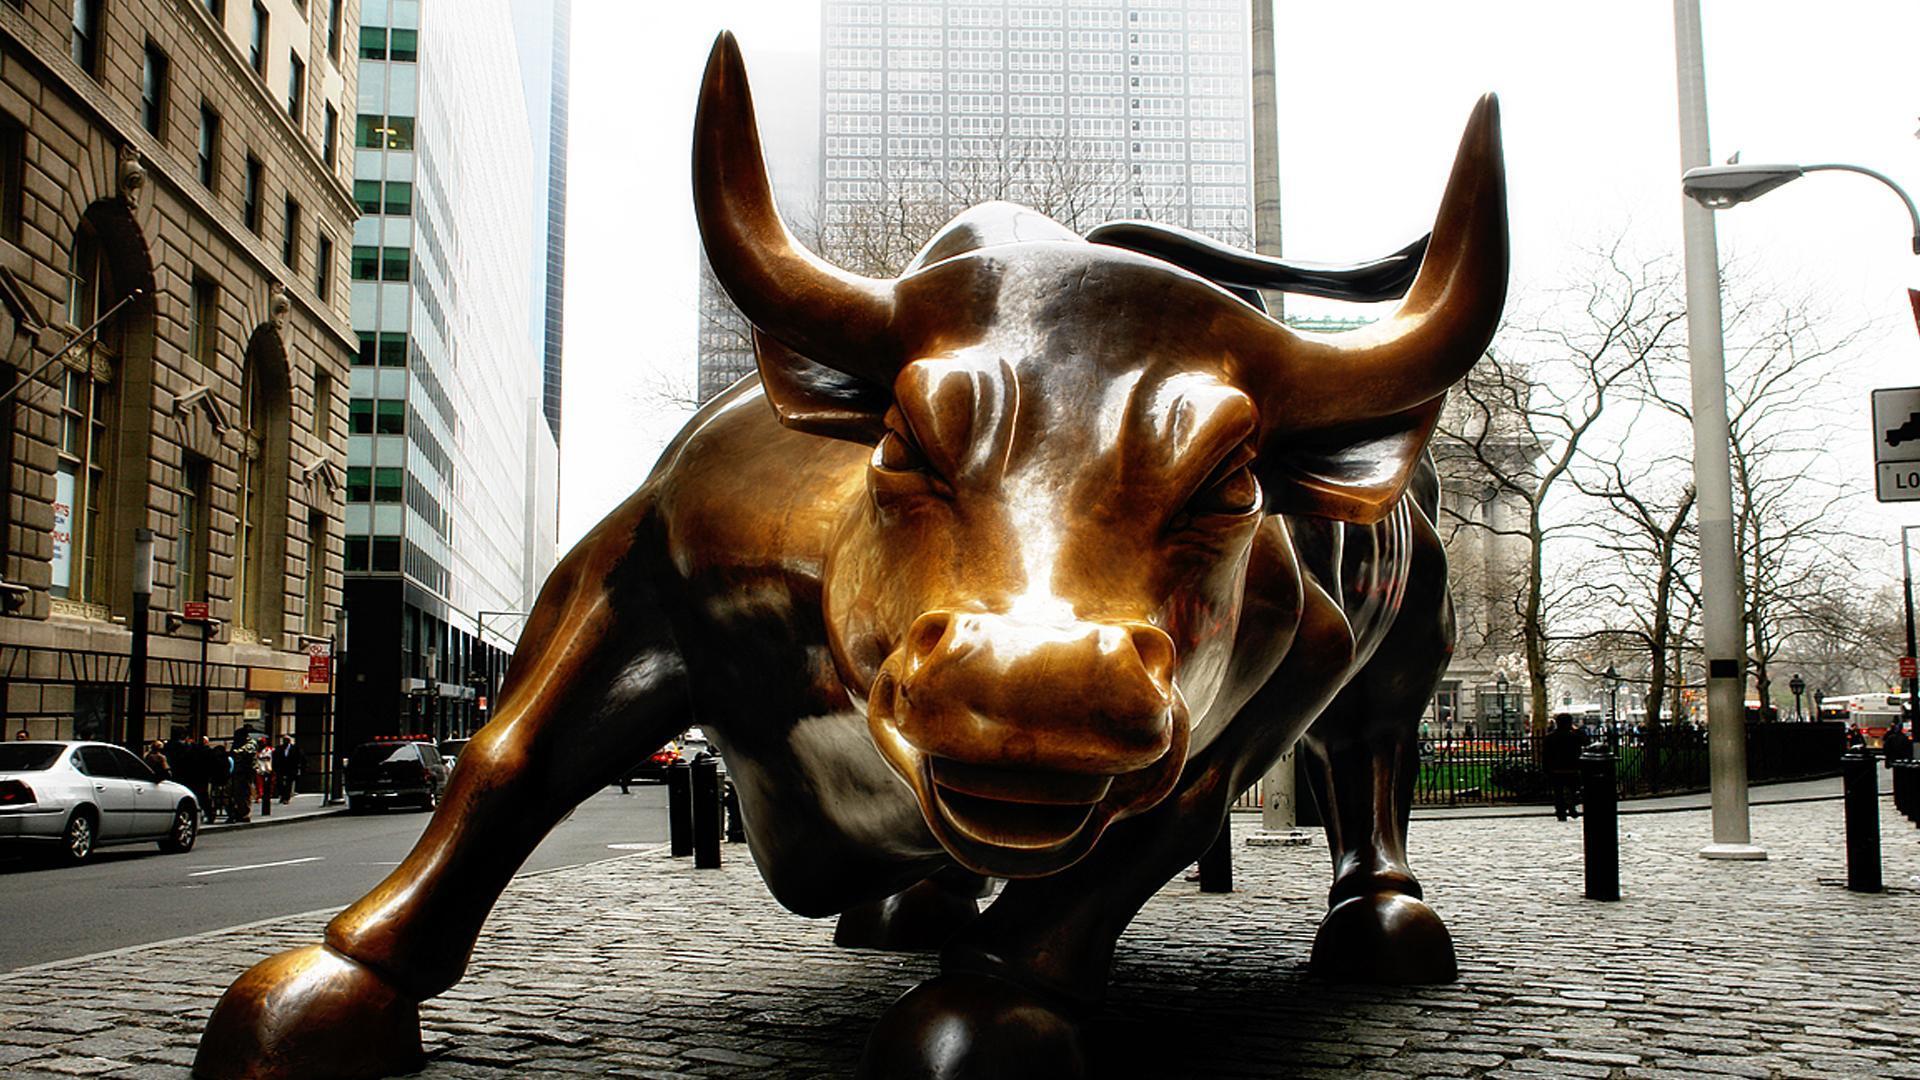 Image For > Wall Street Wallpapers Hd